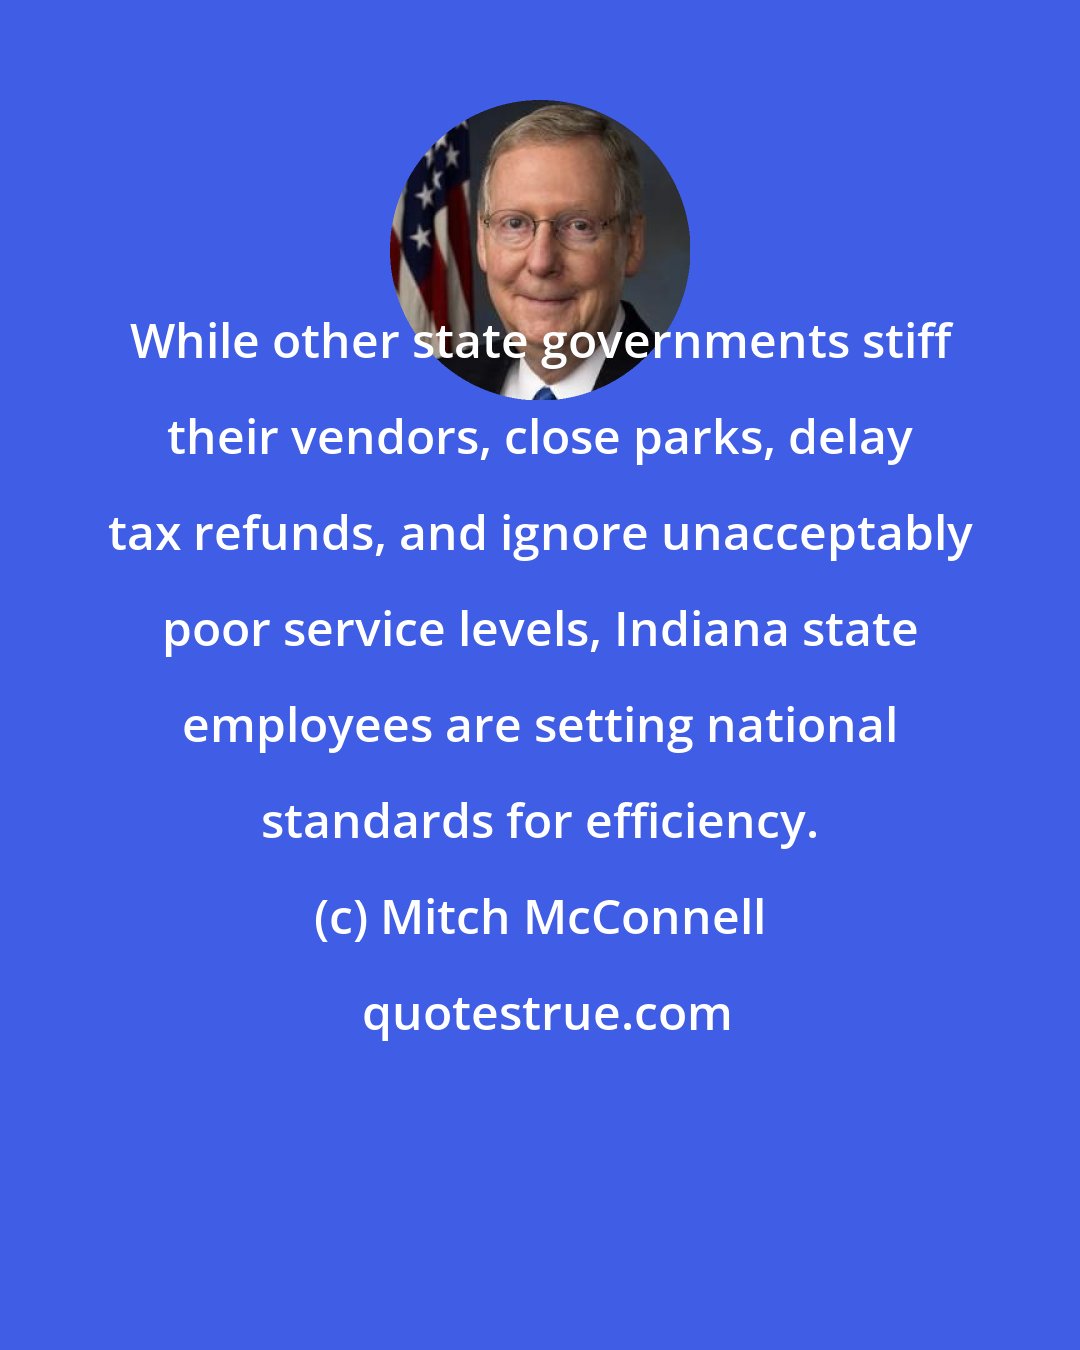 Mitch McConnell: While other state governments stiff their vendors, close parks, delay tax refunds, and ignore unacceptably poor service levels, Indiana state employees are setting national standards for efficiency.